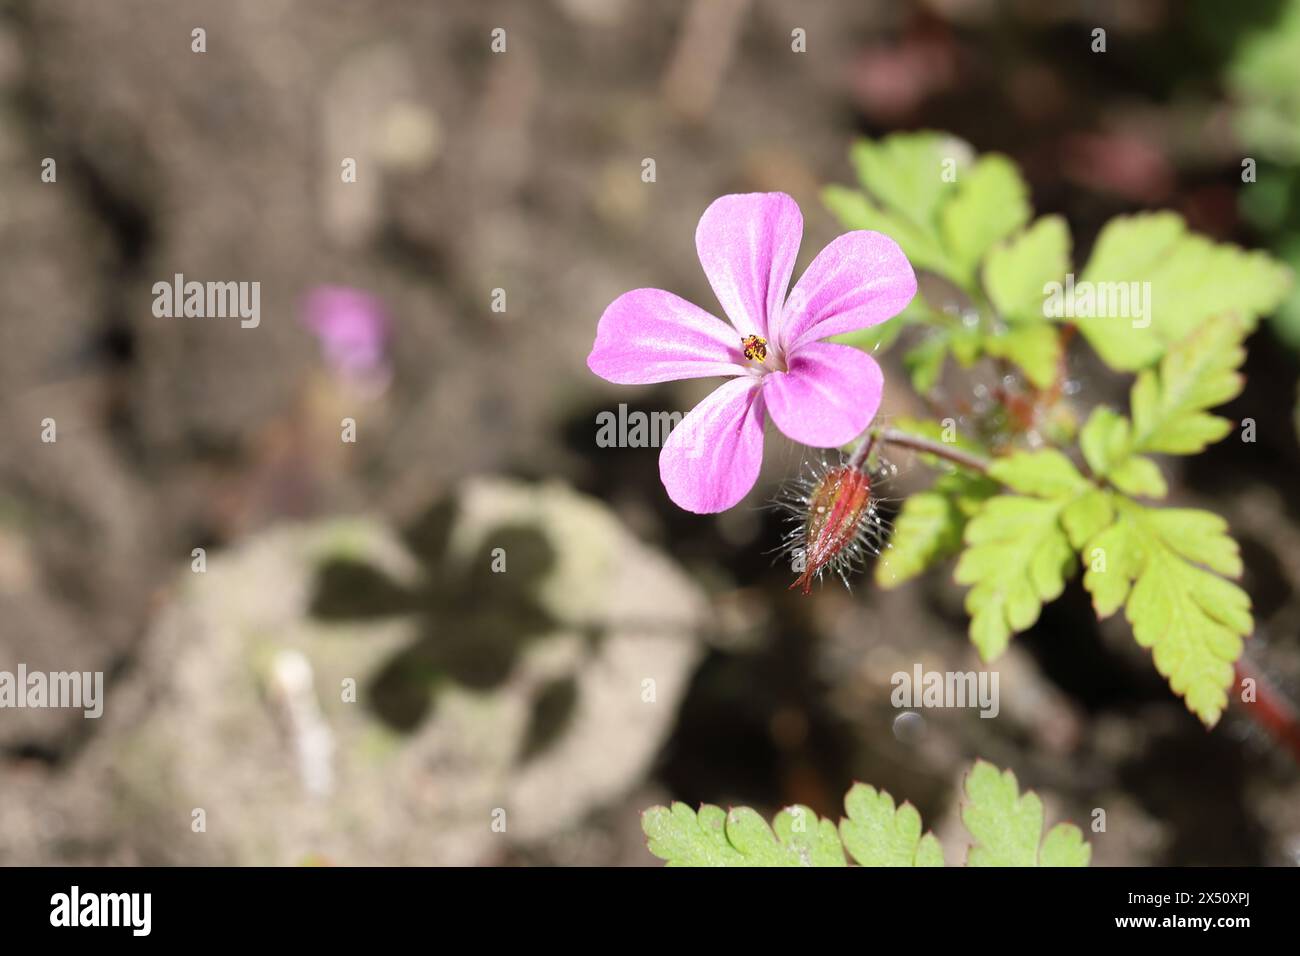 Close-up of a single sunlit Geranium robertianum flower in front of brown soil on which its filigree shadow is depicted Stock Photo